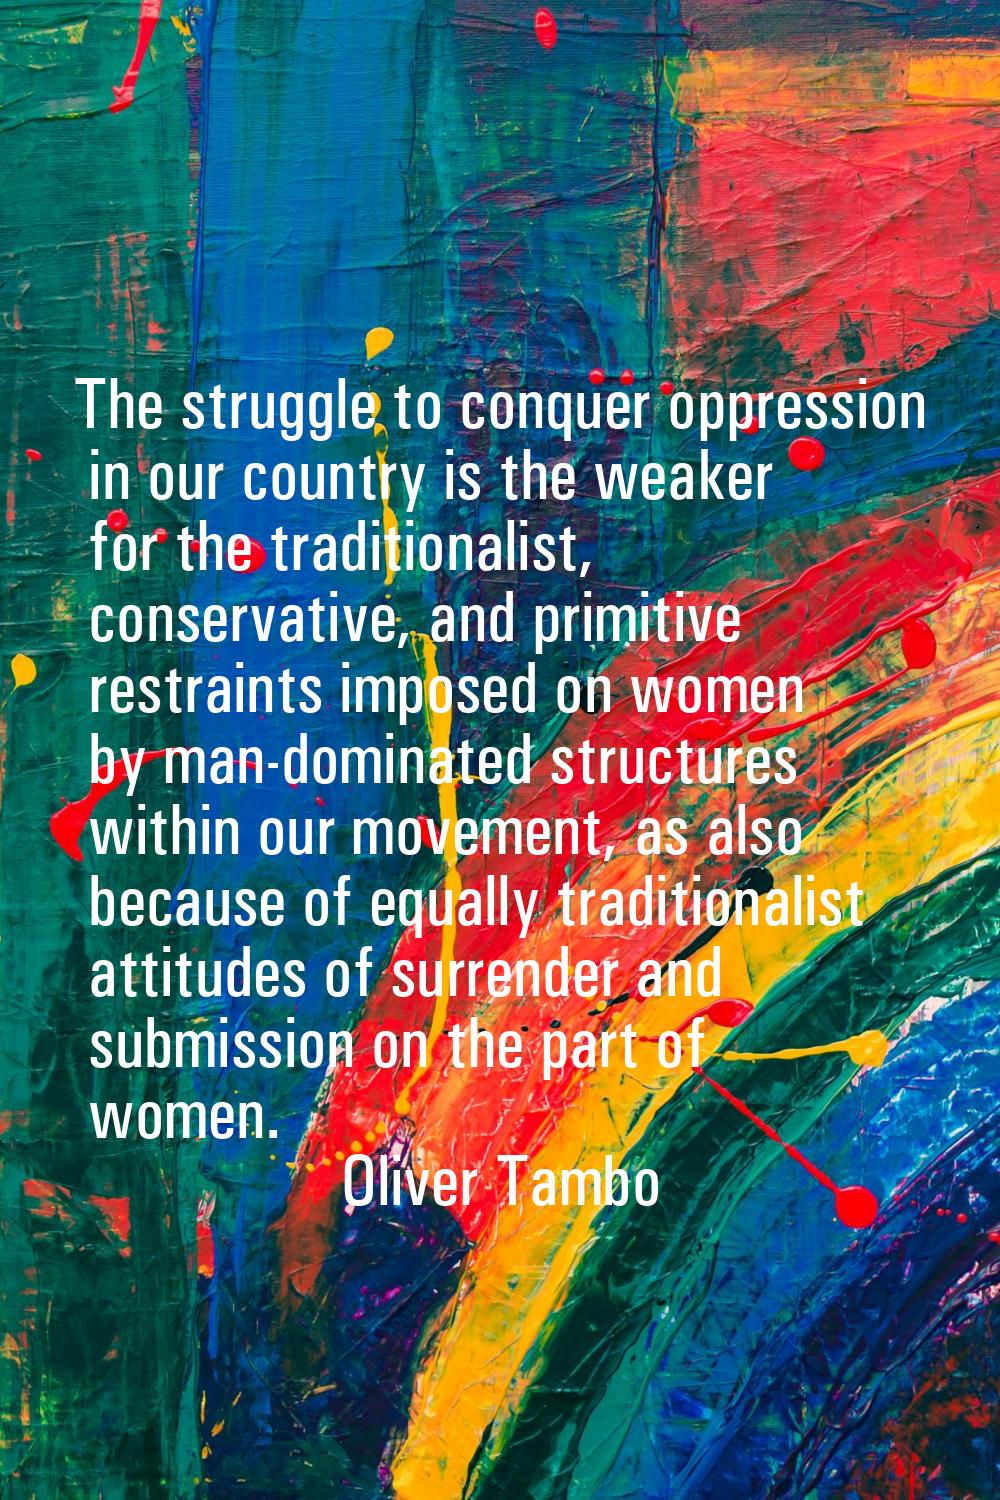 The struggle to conquer oppression in our country is the weaker for the traditionalist, conservativ